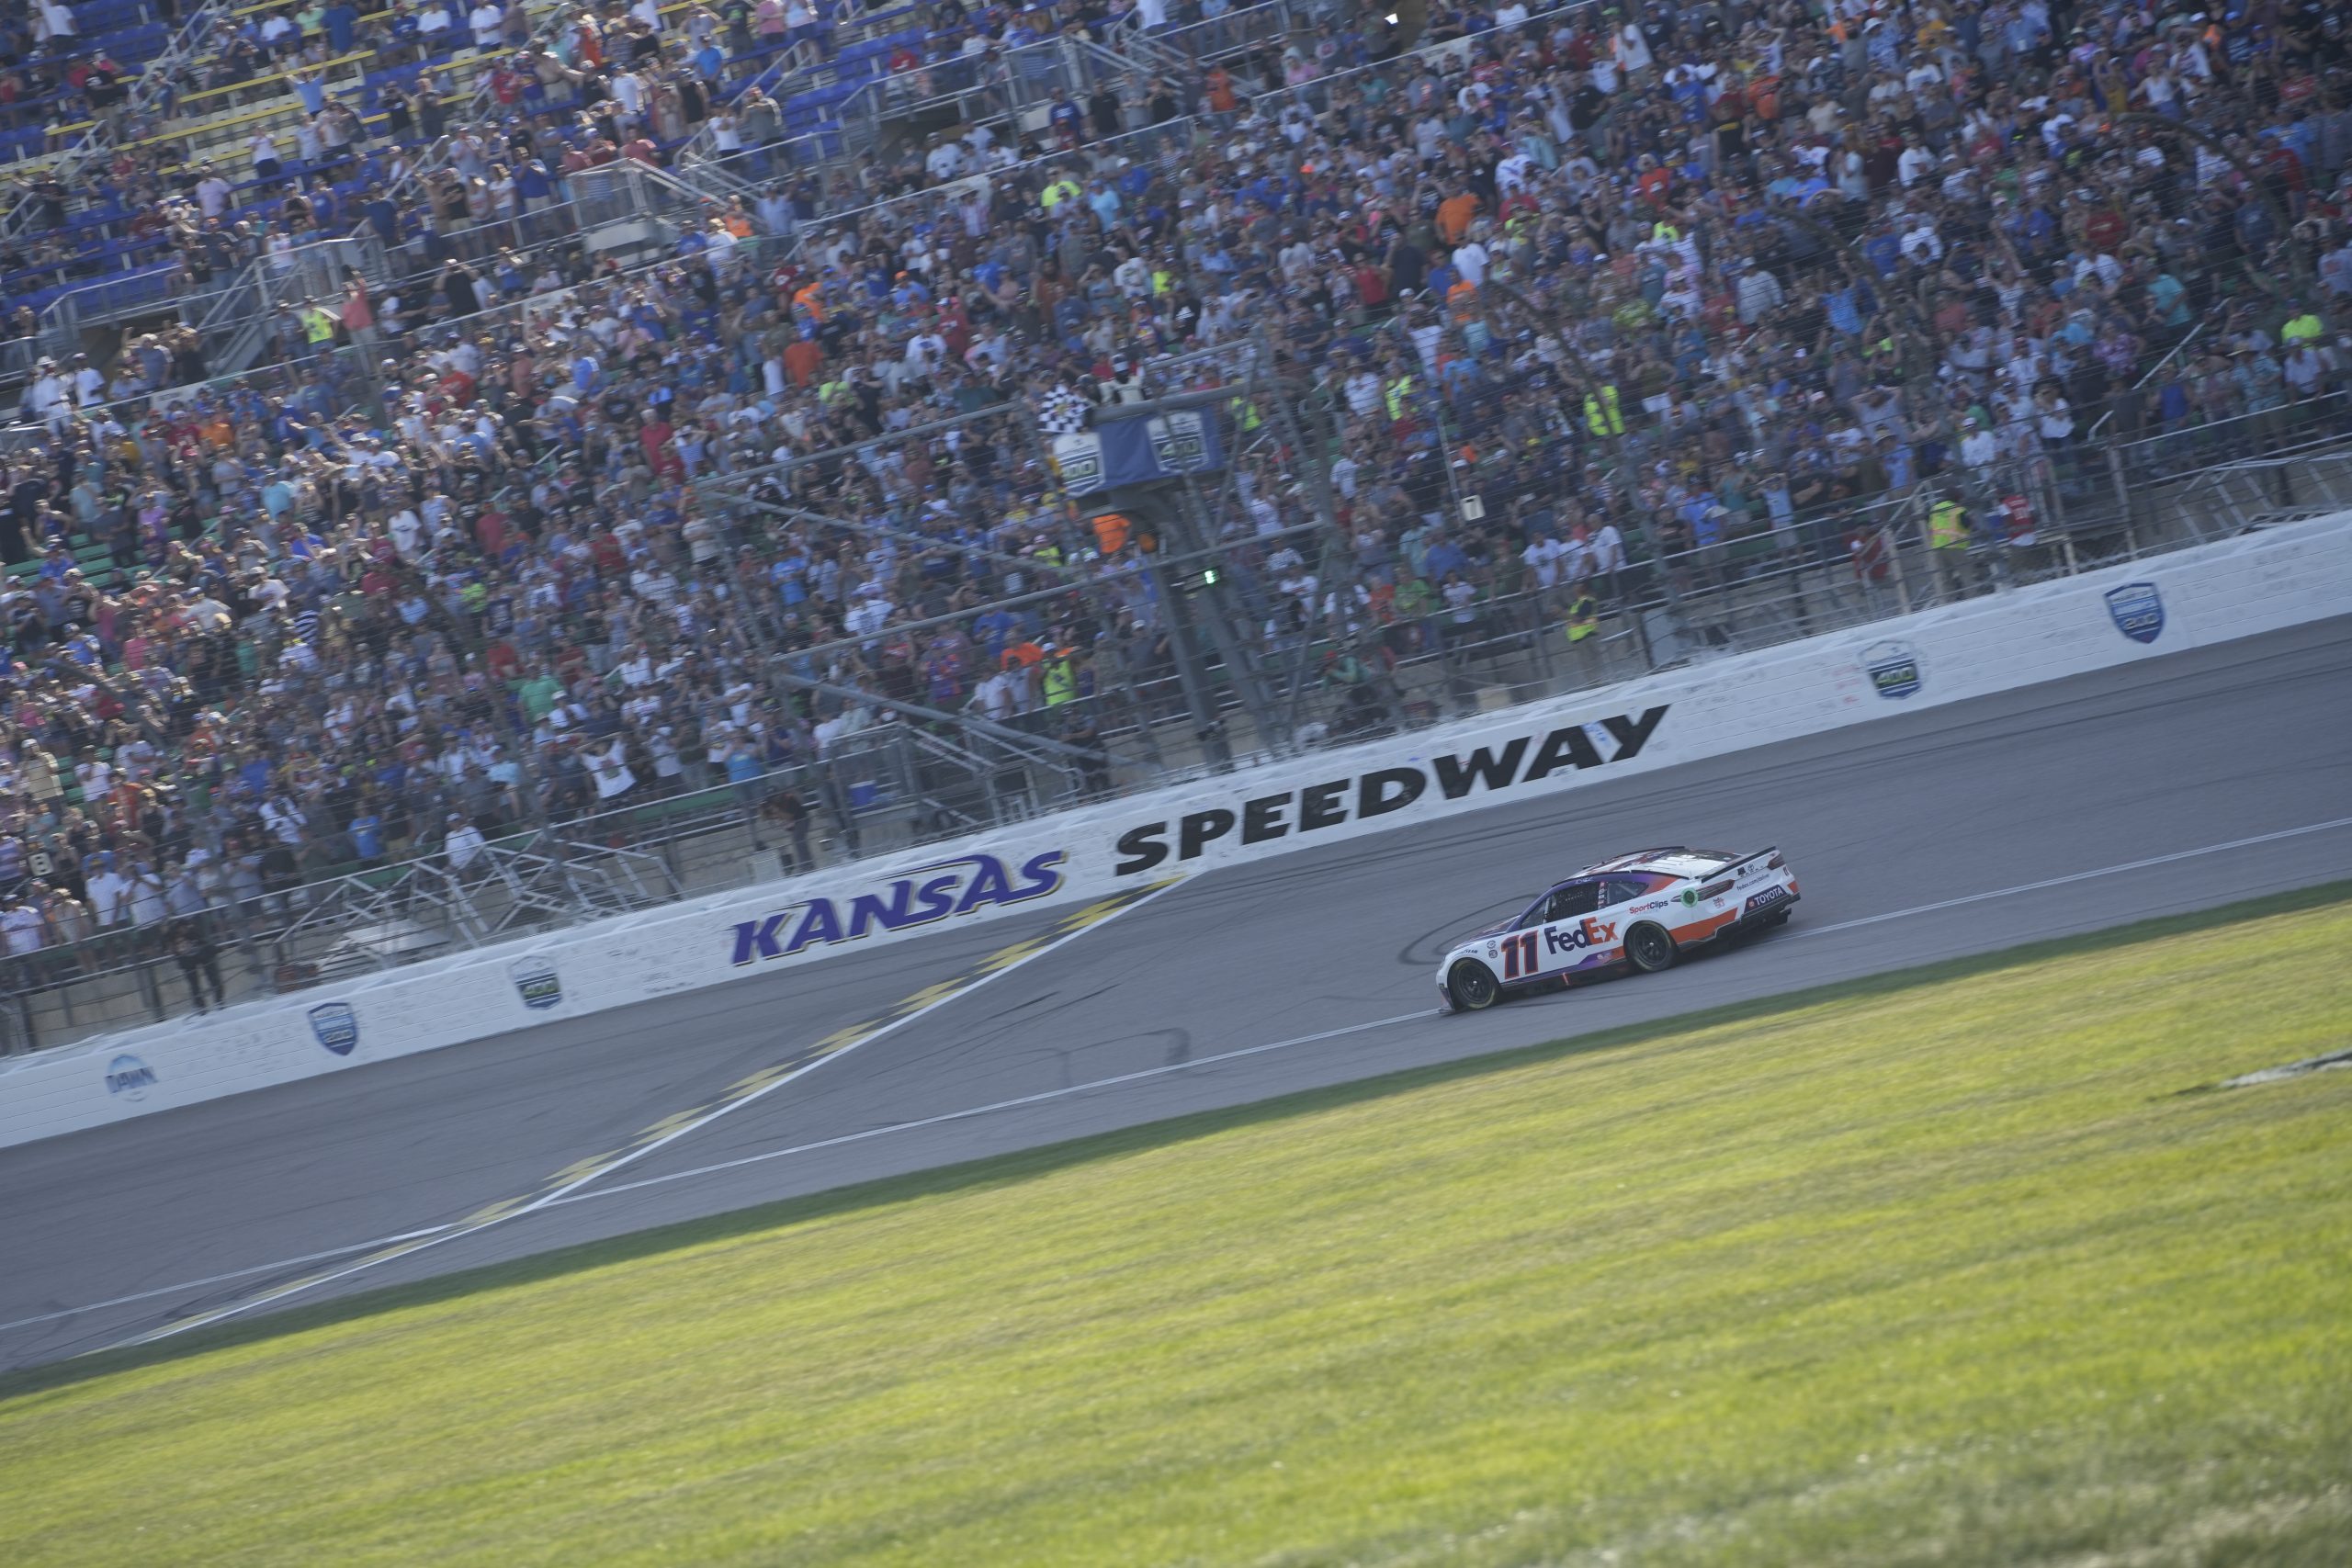 It was a long road to get from there to here for Hamlin and Victory Lane at Kansas. (Photo: Christopher Vargas | The Podium Finish)